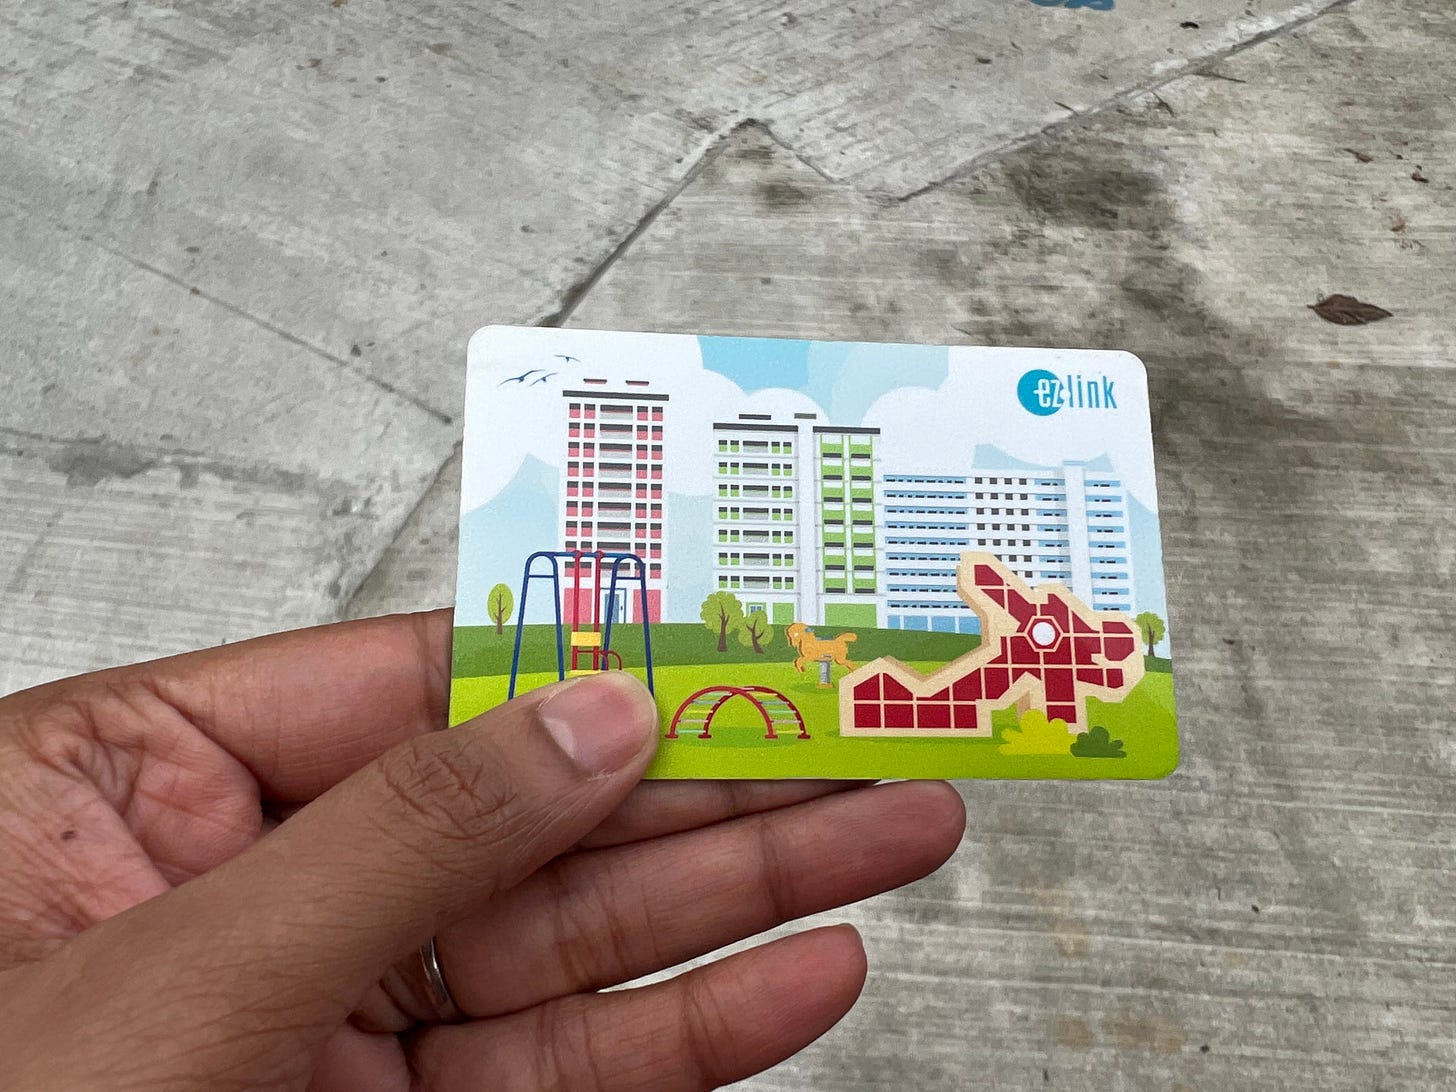 EZ link Smart Card for MRT and Bus